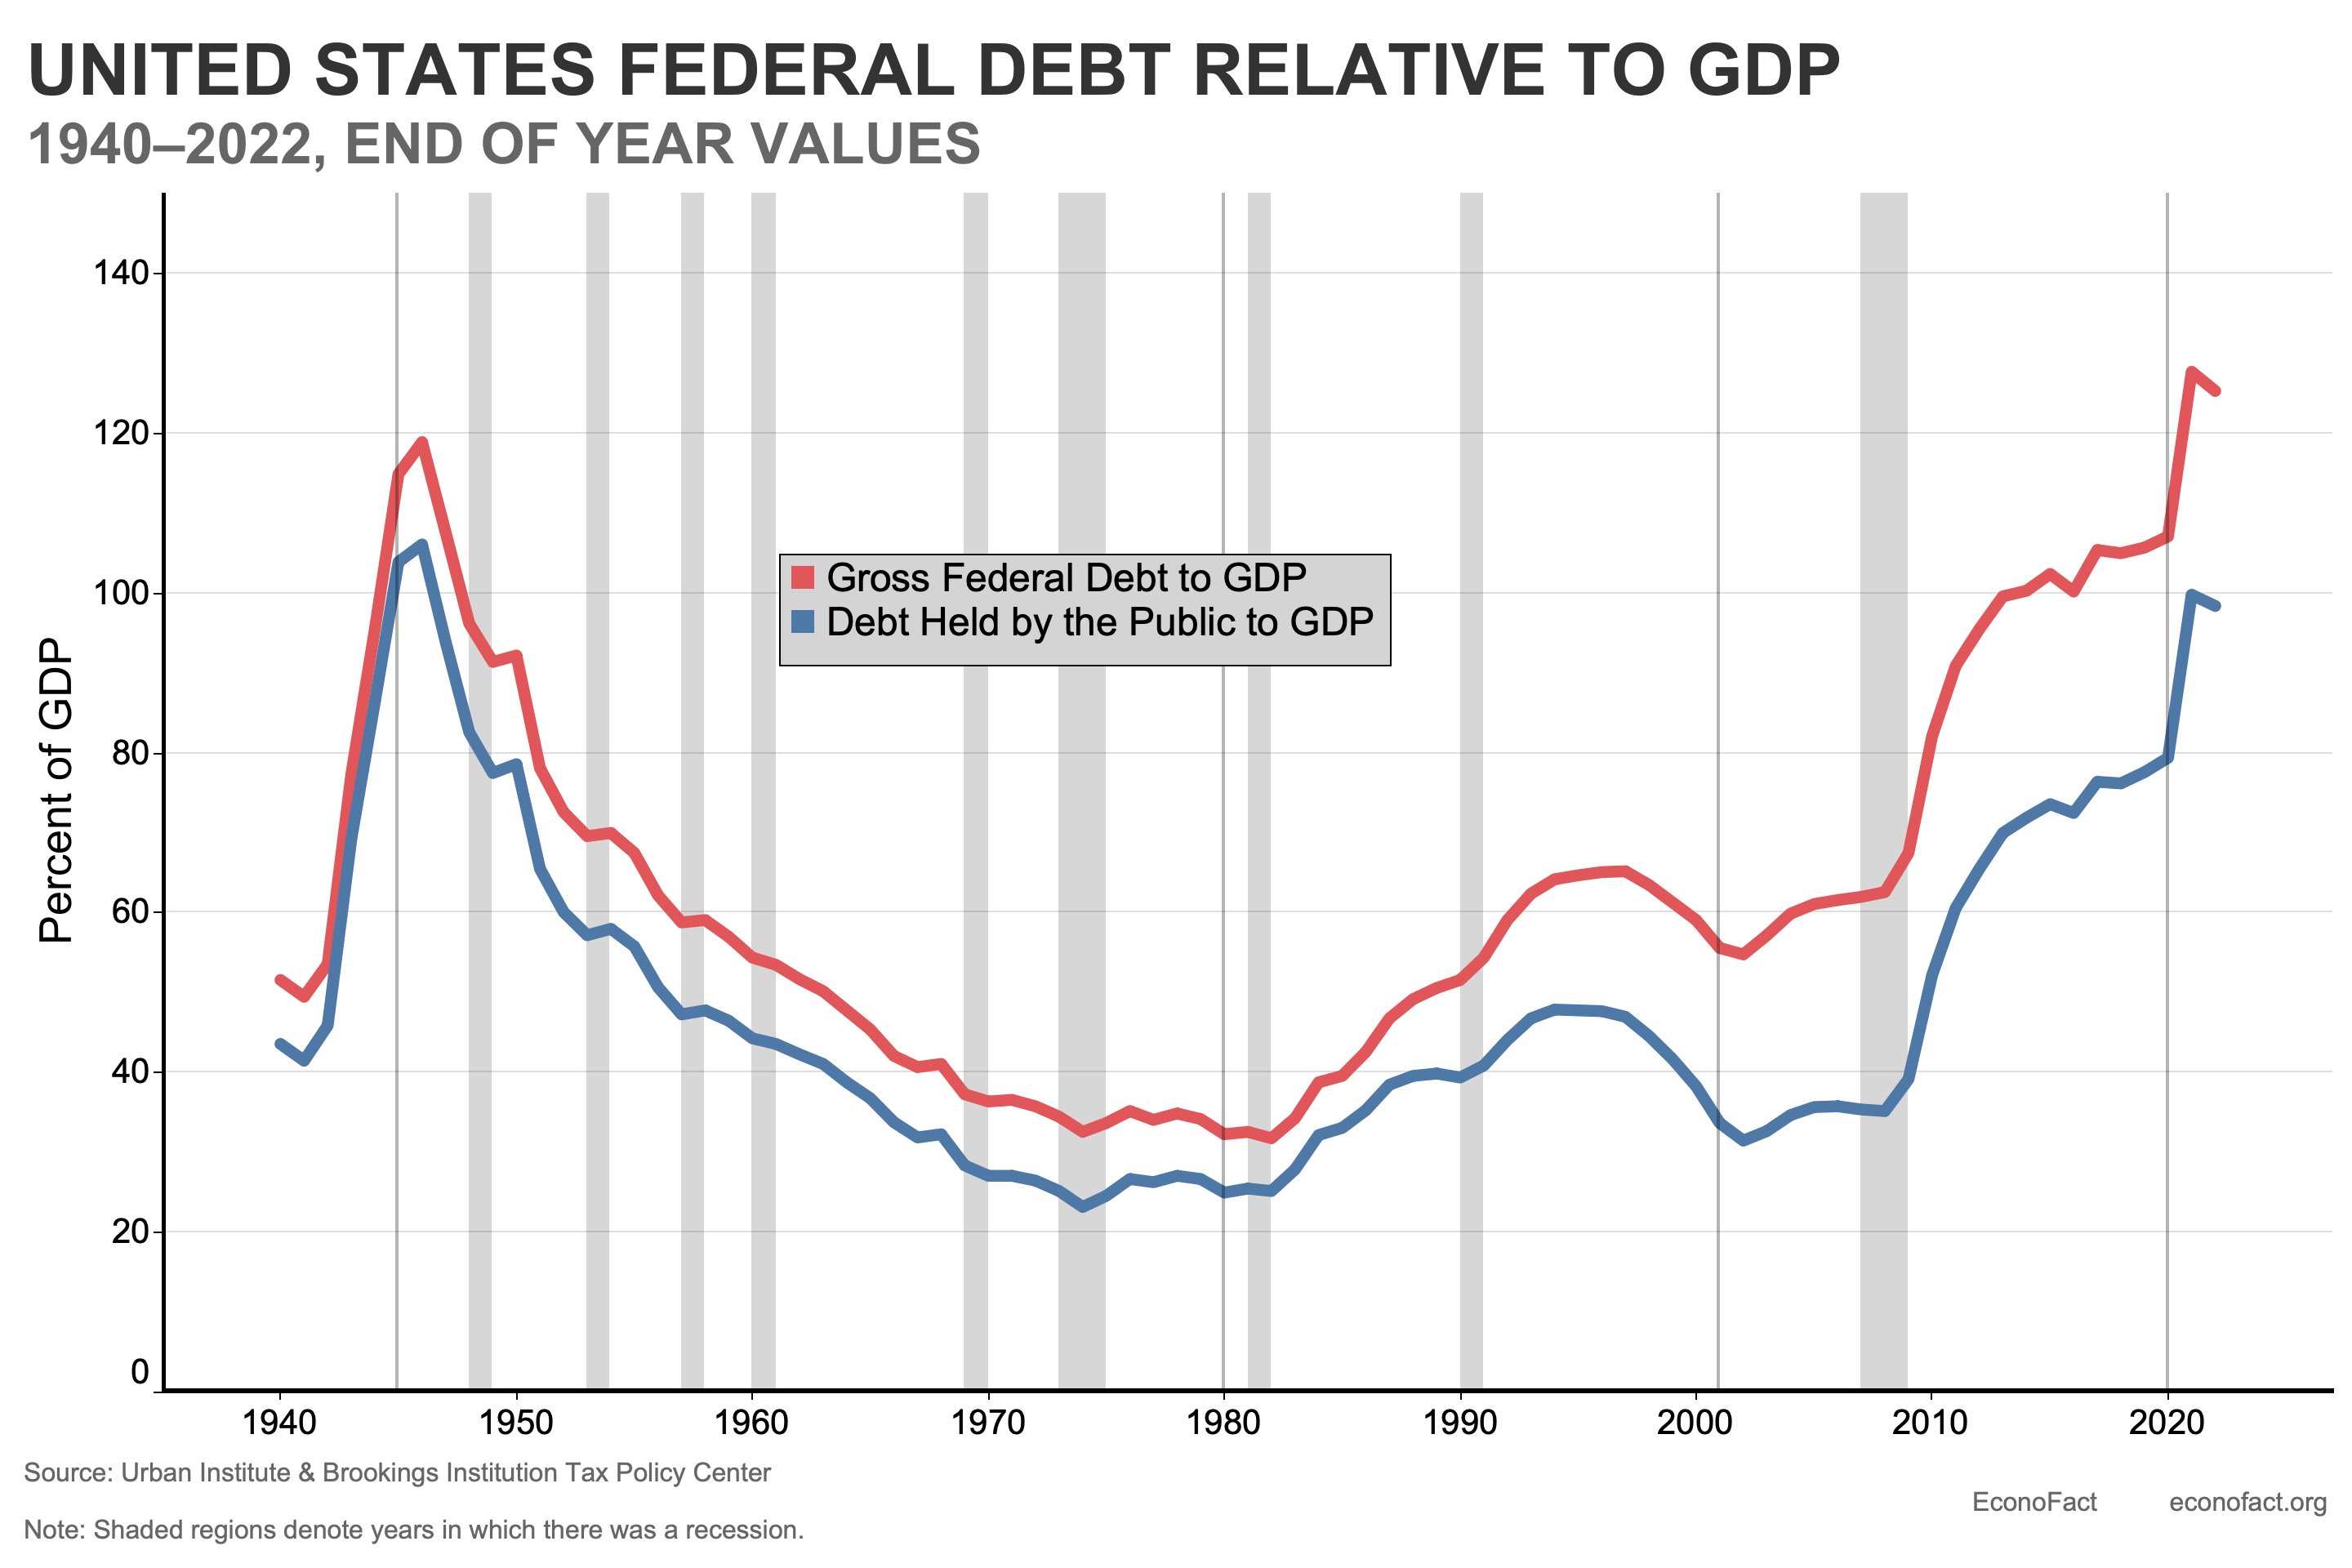 Graph showing the evolution of the Federal debt and public debt as a share of GDP, 1940-2022.